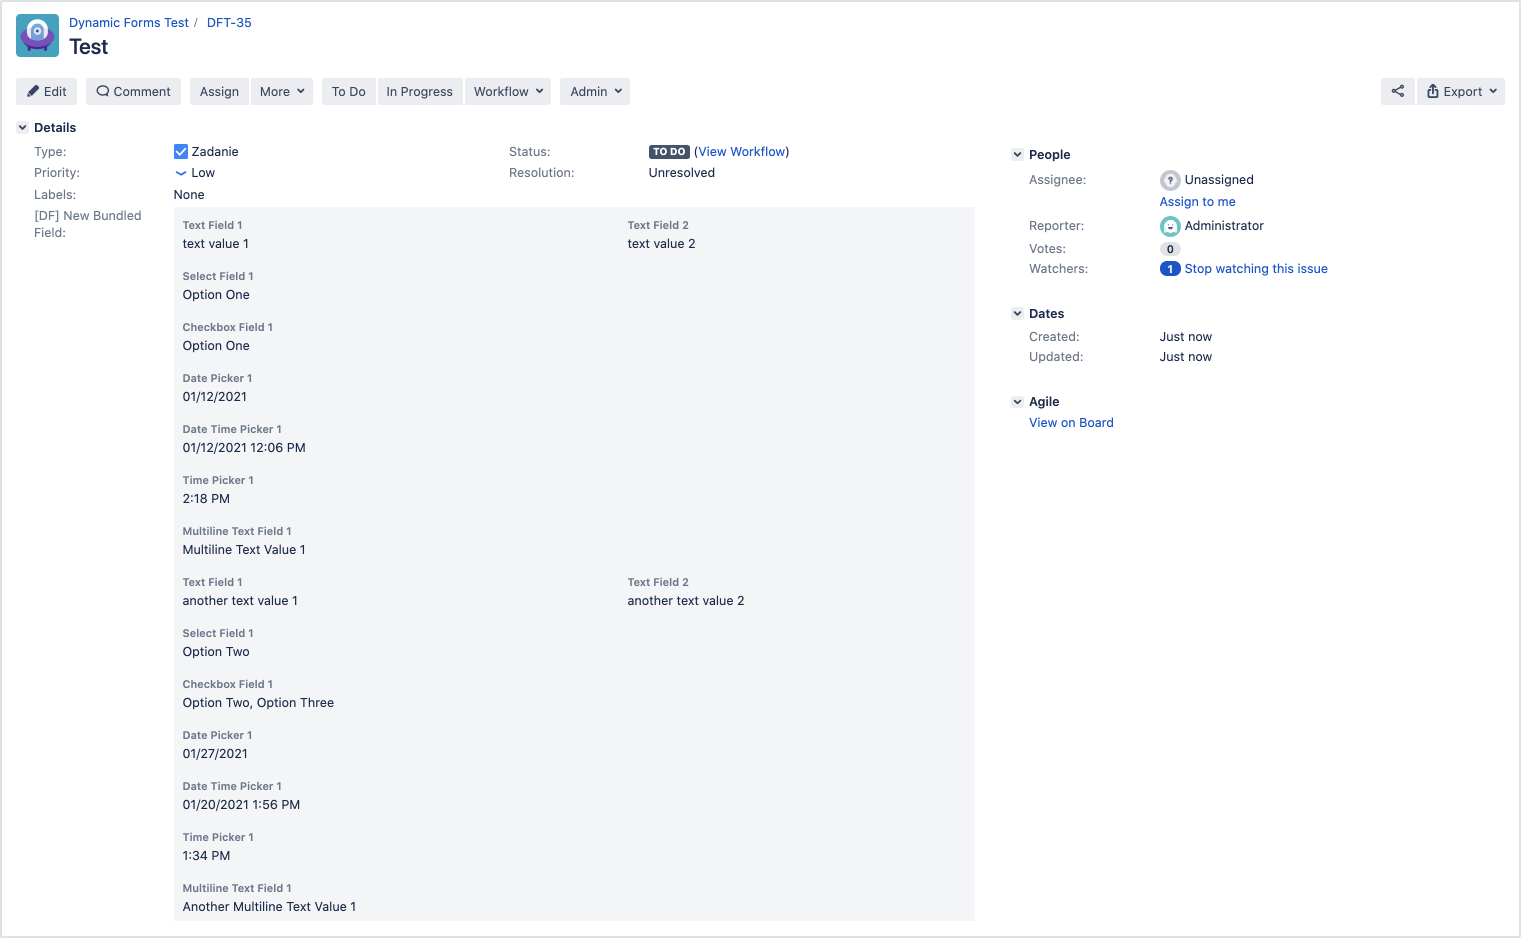 Dynamic Forms for Jira - Bundled Field Structure: Jira Issue View